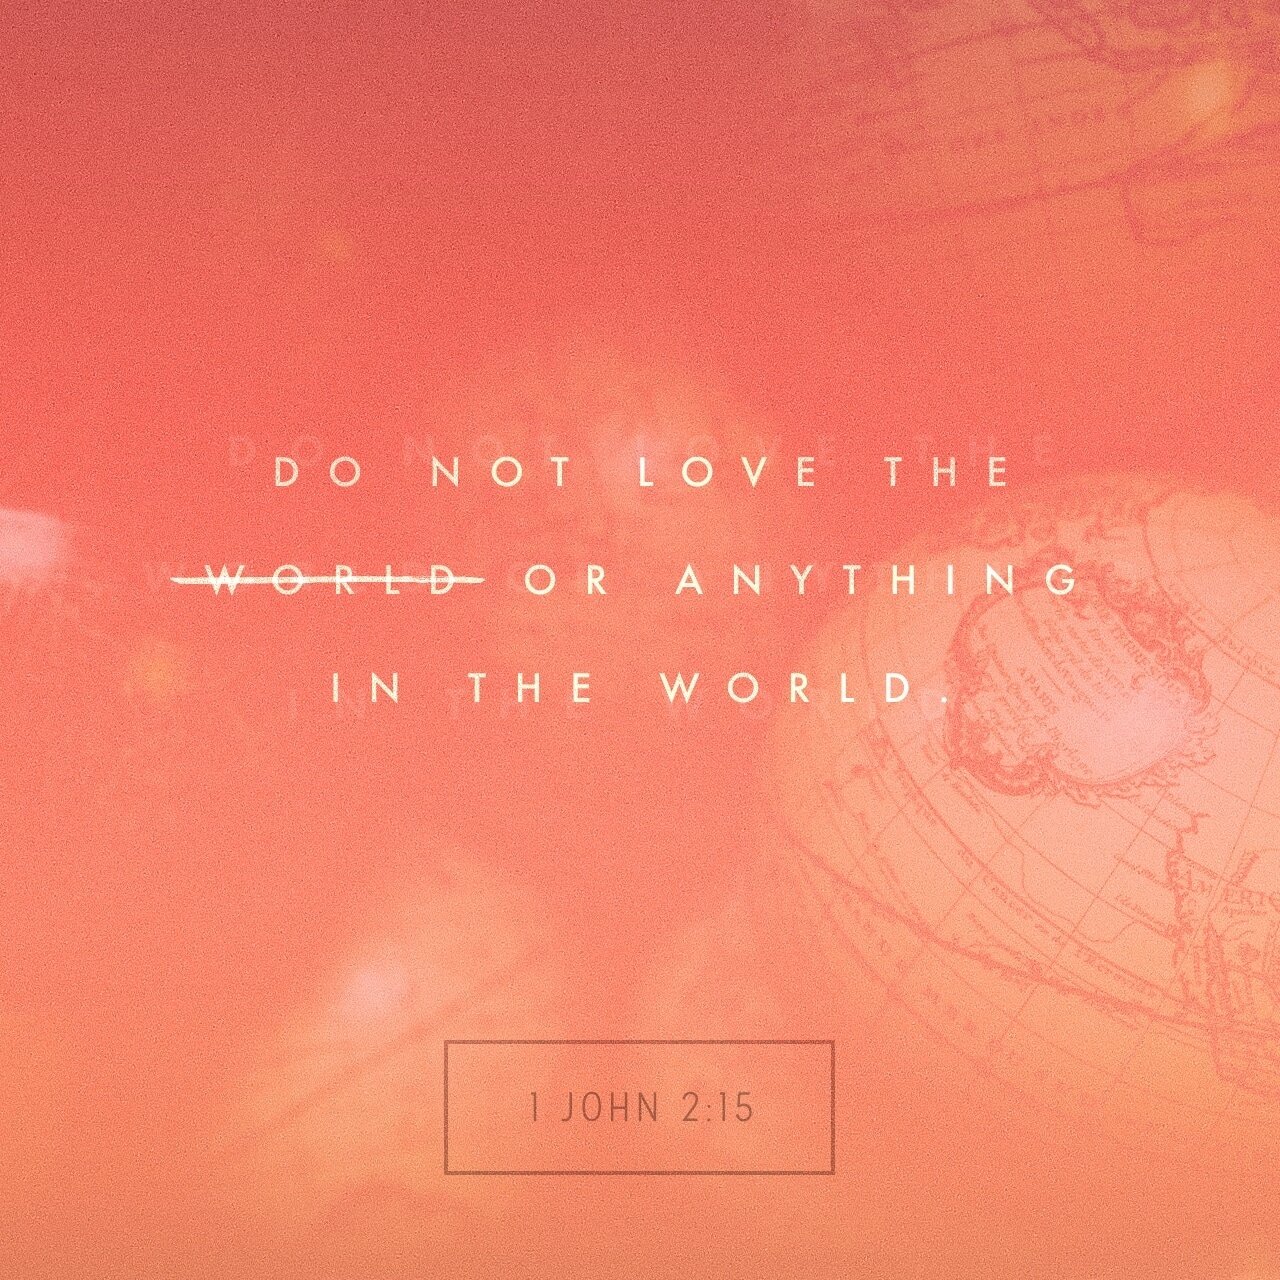 Do not love the world or anything in the world. ~ 1 John 2:15